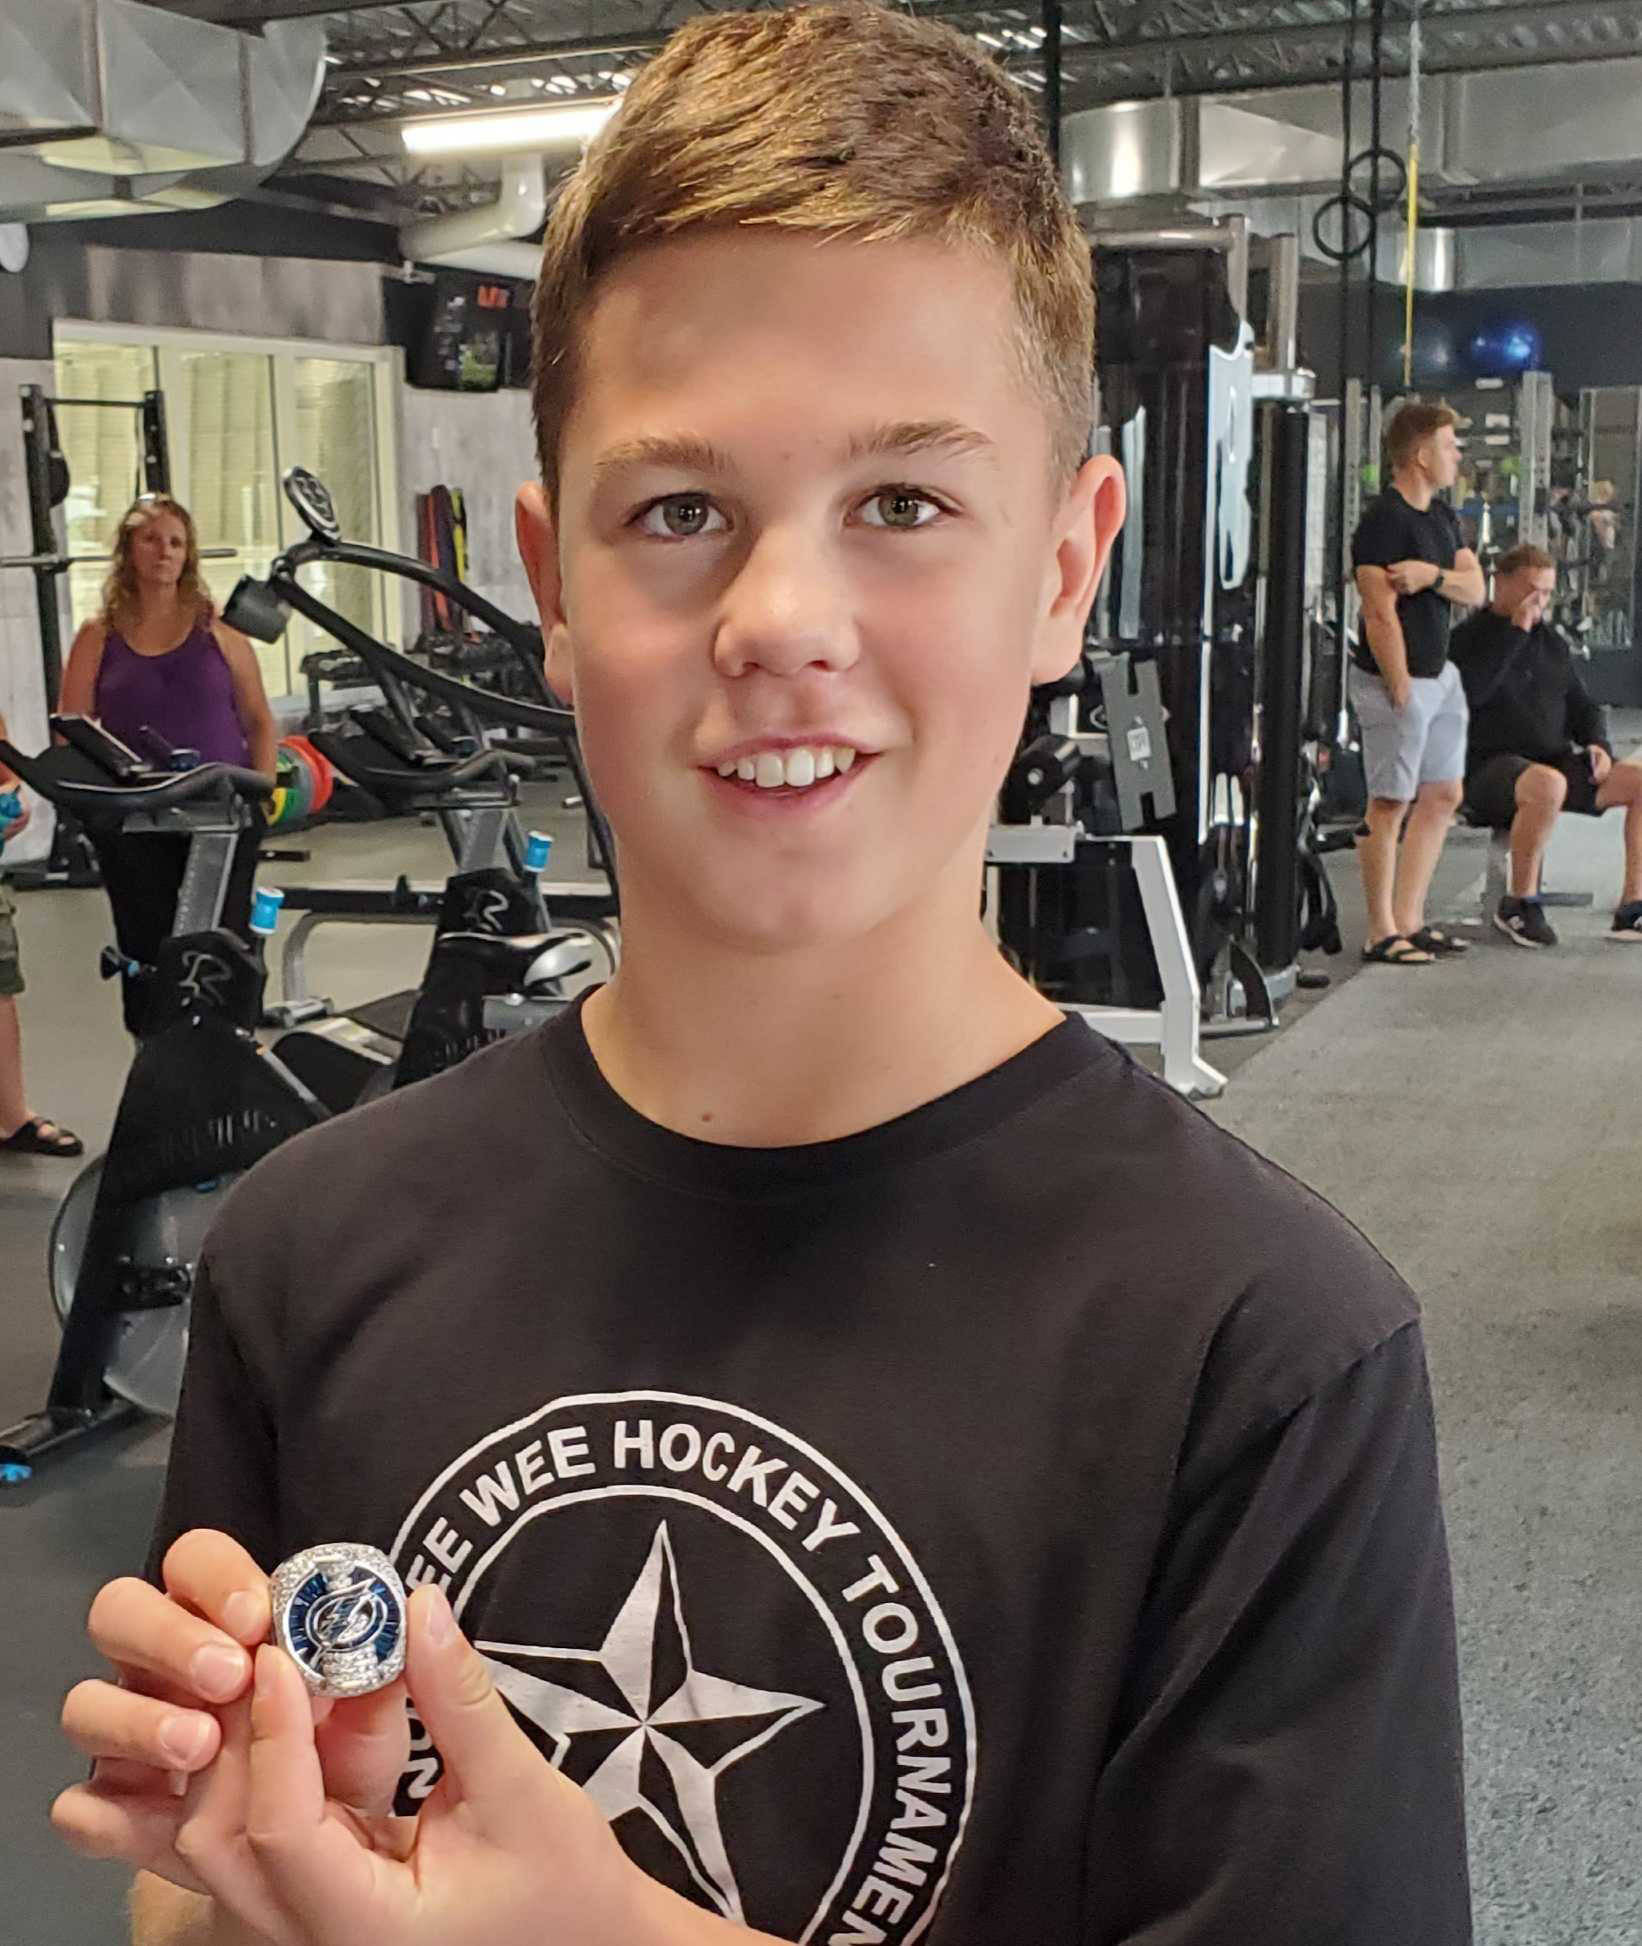 Noah Frick of Coldstream, 13, admires the 2020 Stanley Cup championship ring belonging to Coldstream’s Stacy Roest of the Tampa Bay Lightning at Vernon’s Training House in Kal Tire Place North arena Wednesday, Aug. 3. Roest, his ring and the Stanley Cup were on hand for a private function at the facility, Roest’s way of saying thanks to owners Rhonda Catt and Carla Rayner and Training House clients for their encouragement and support. Roest is the Lightning’s assistant general manager and gets a full day with Cup. (Roger Knox - Morning Star)